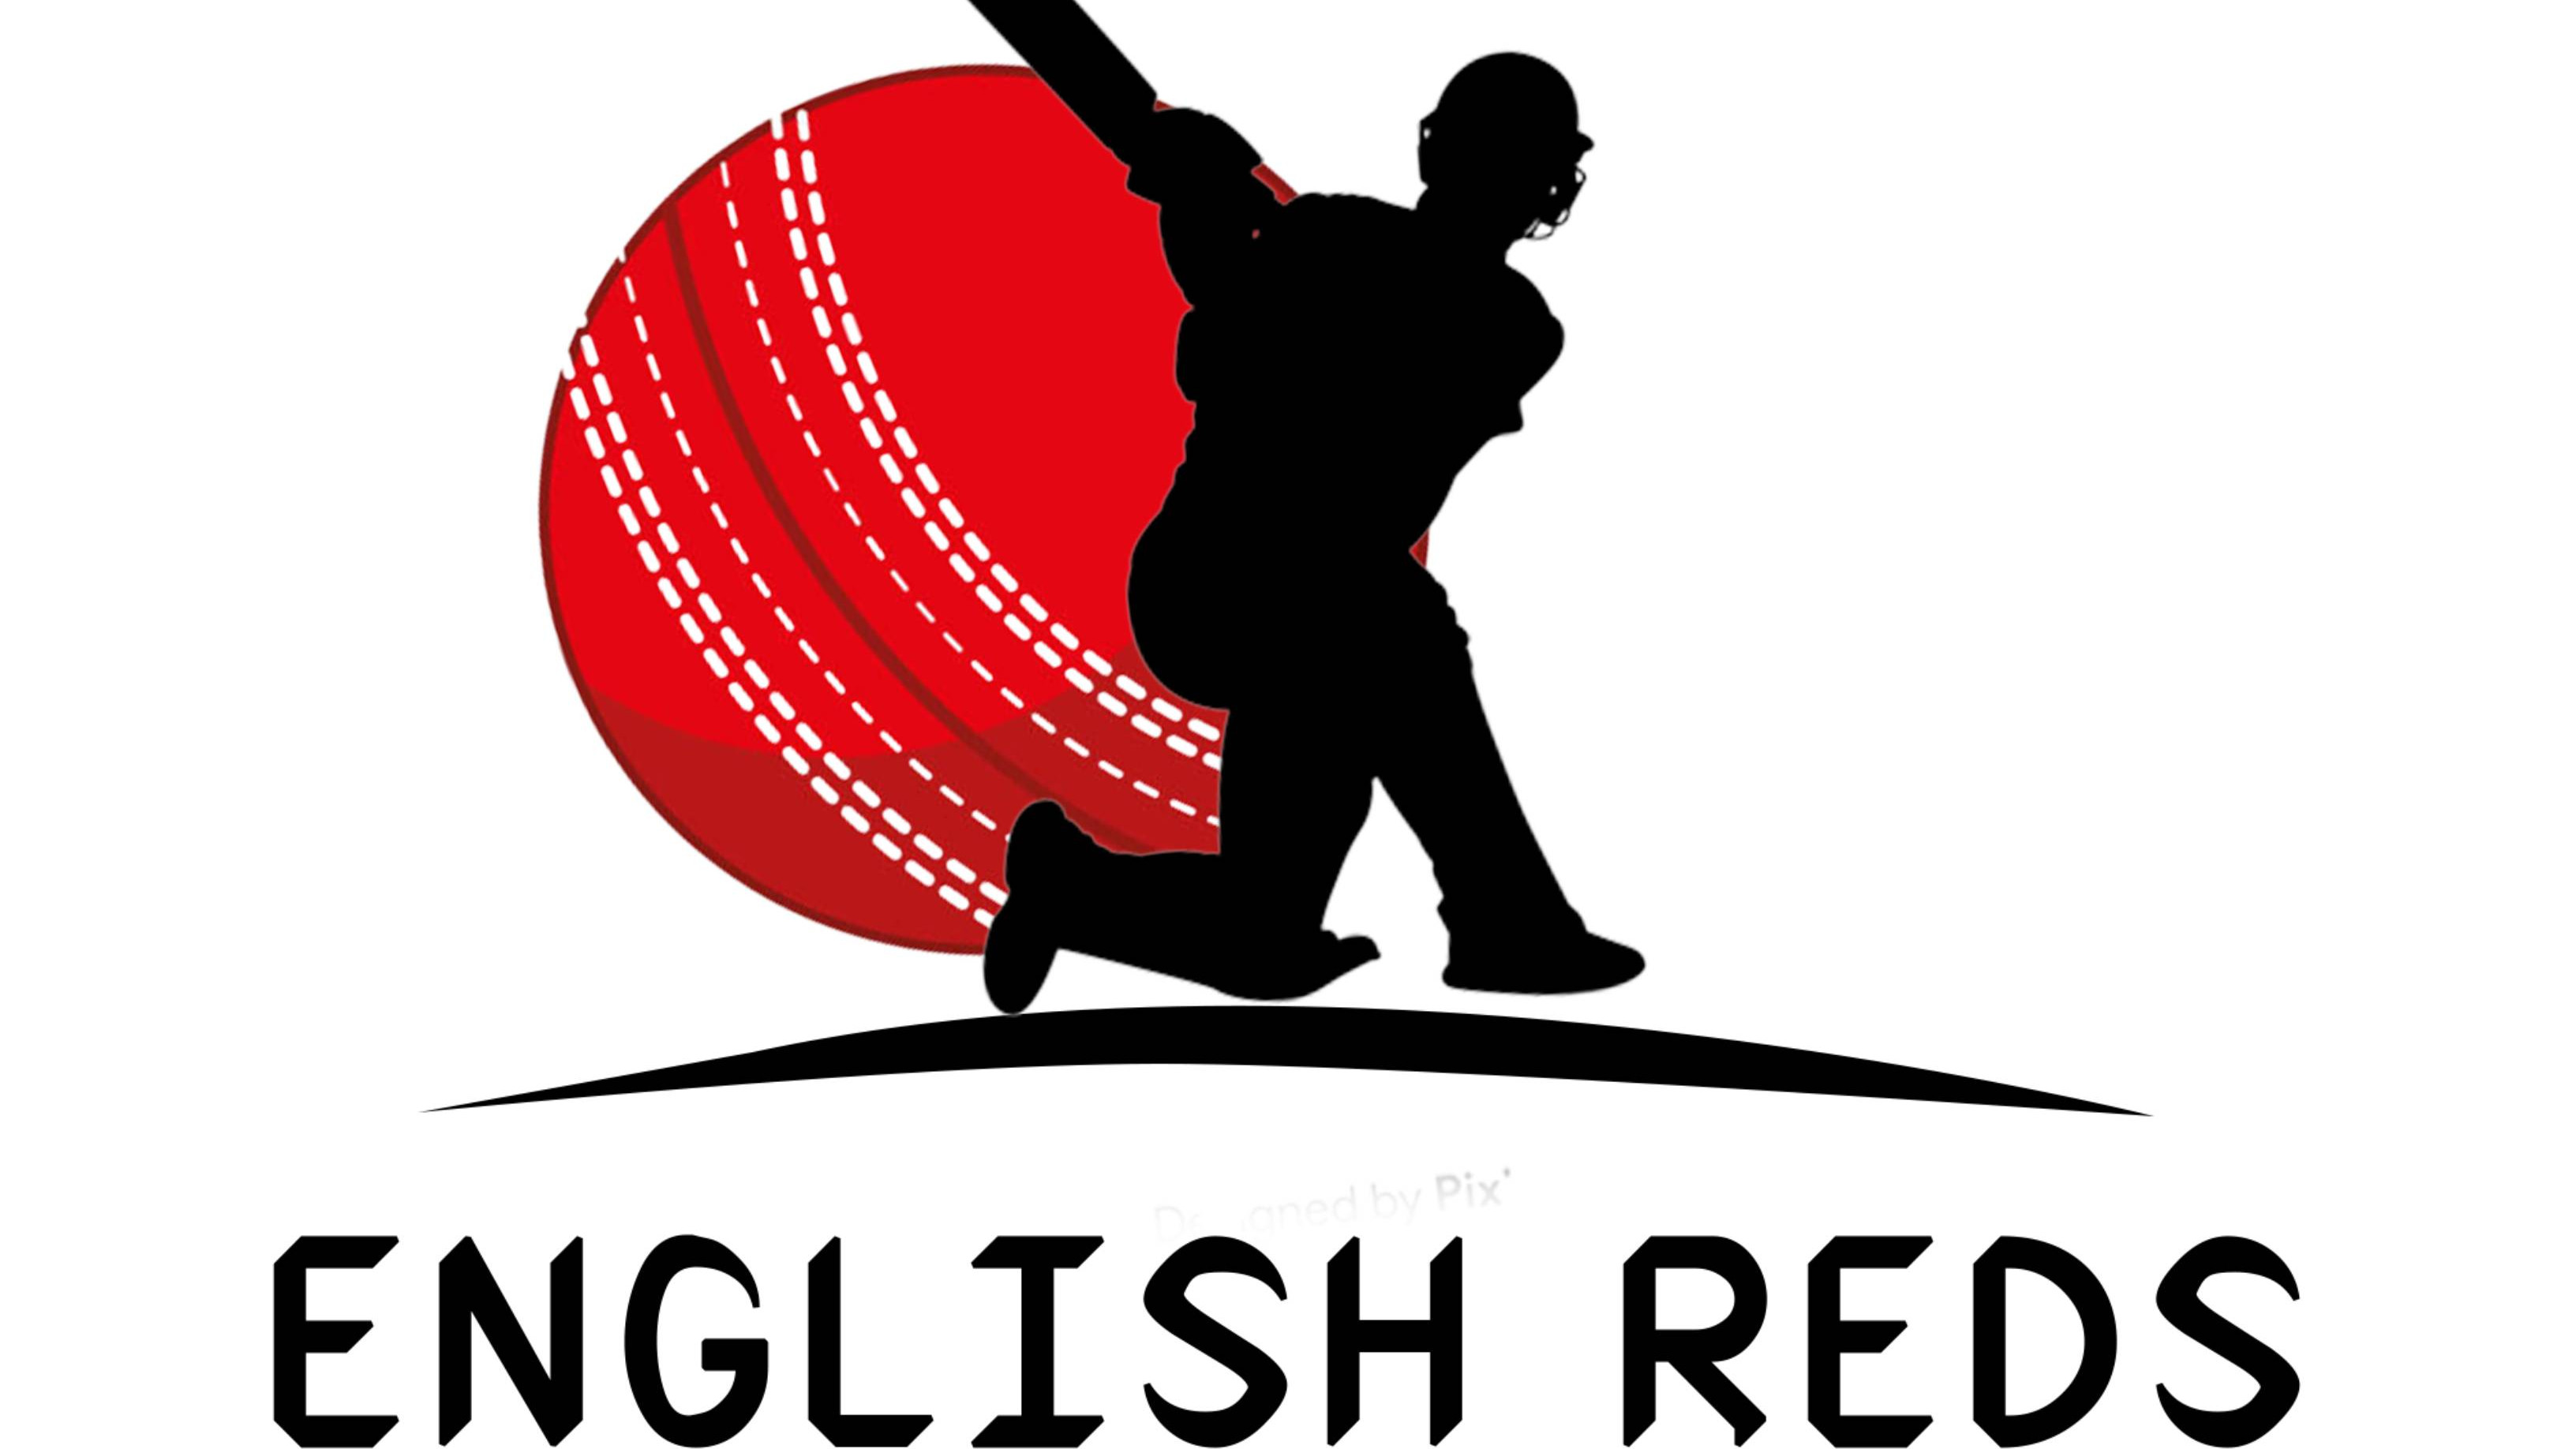 English Reds squad unveiled for the inaugural GPCL season